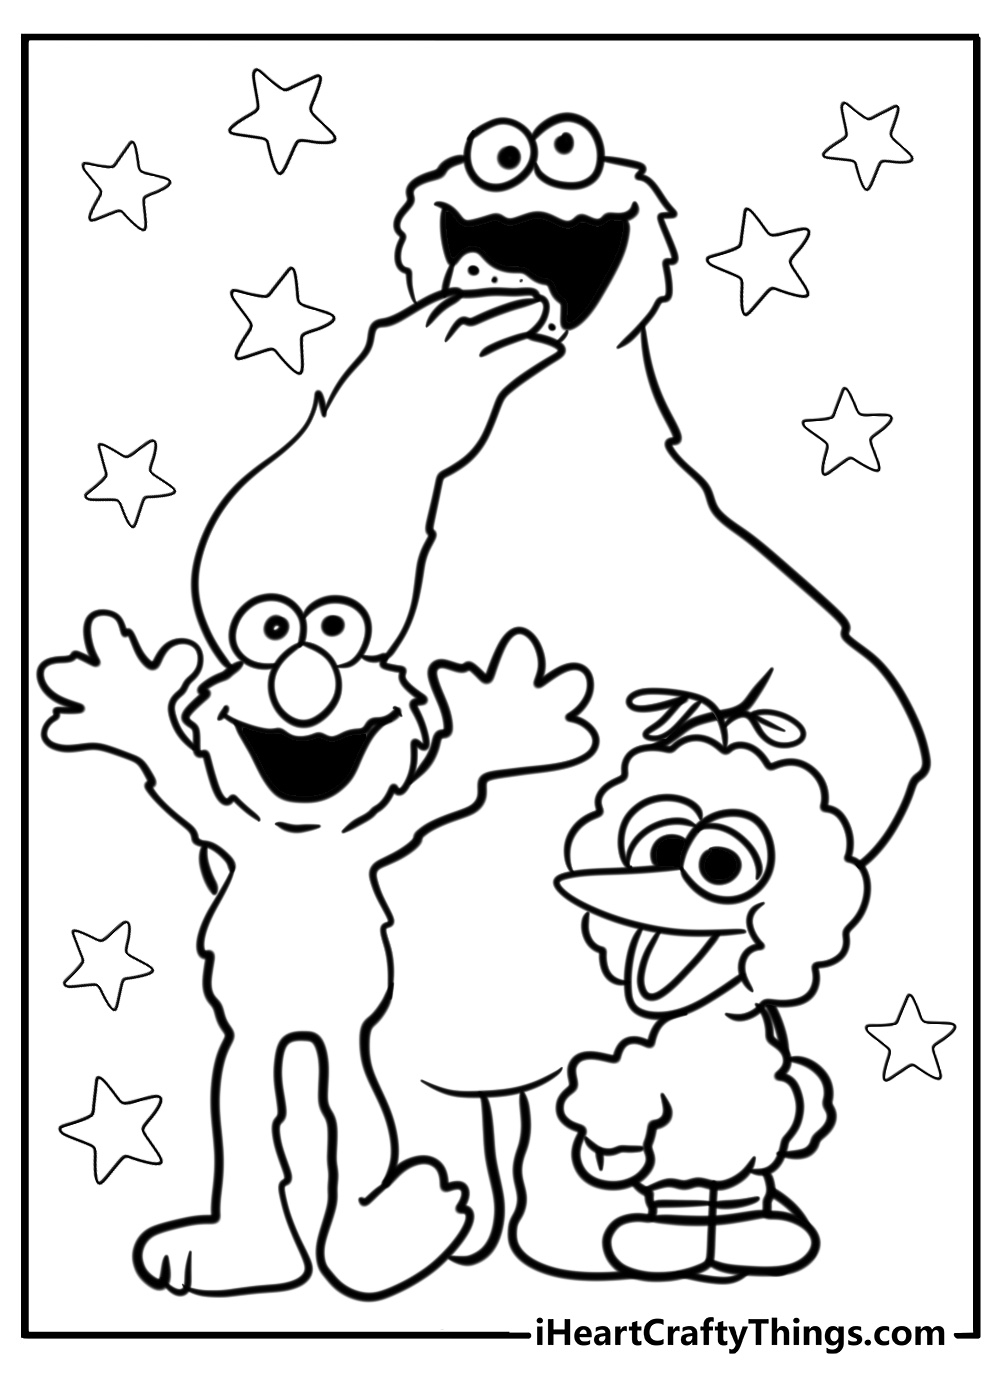 Baby big bird cookie monster and elmo to color